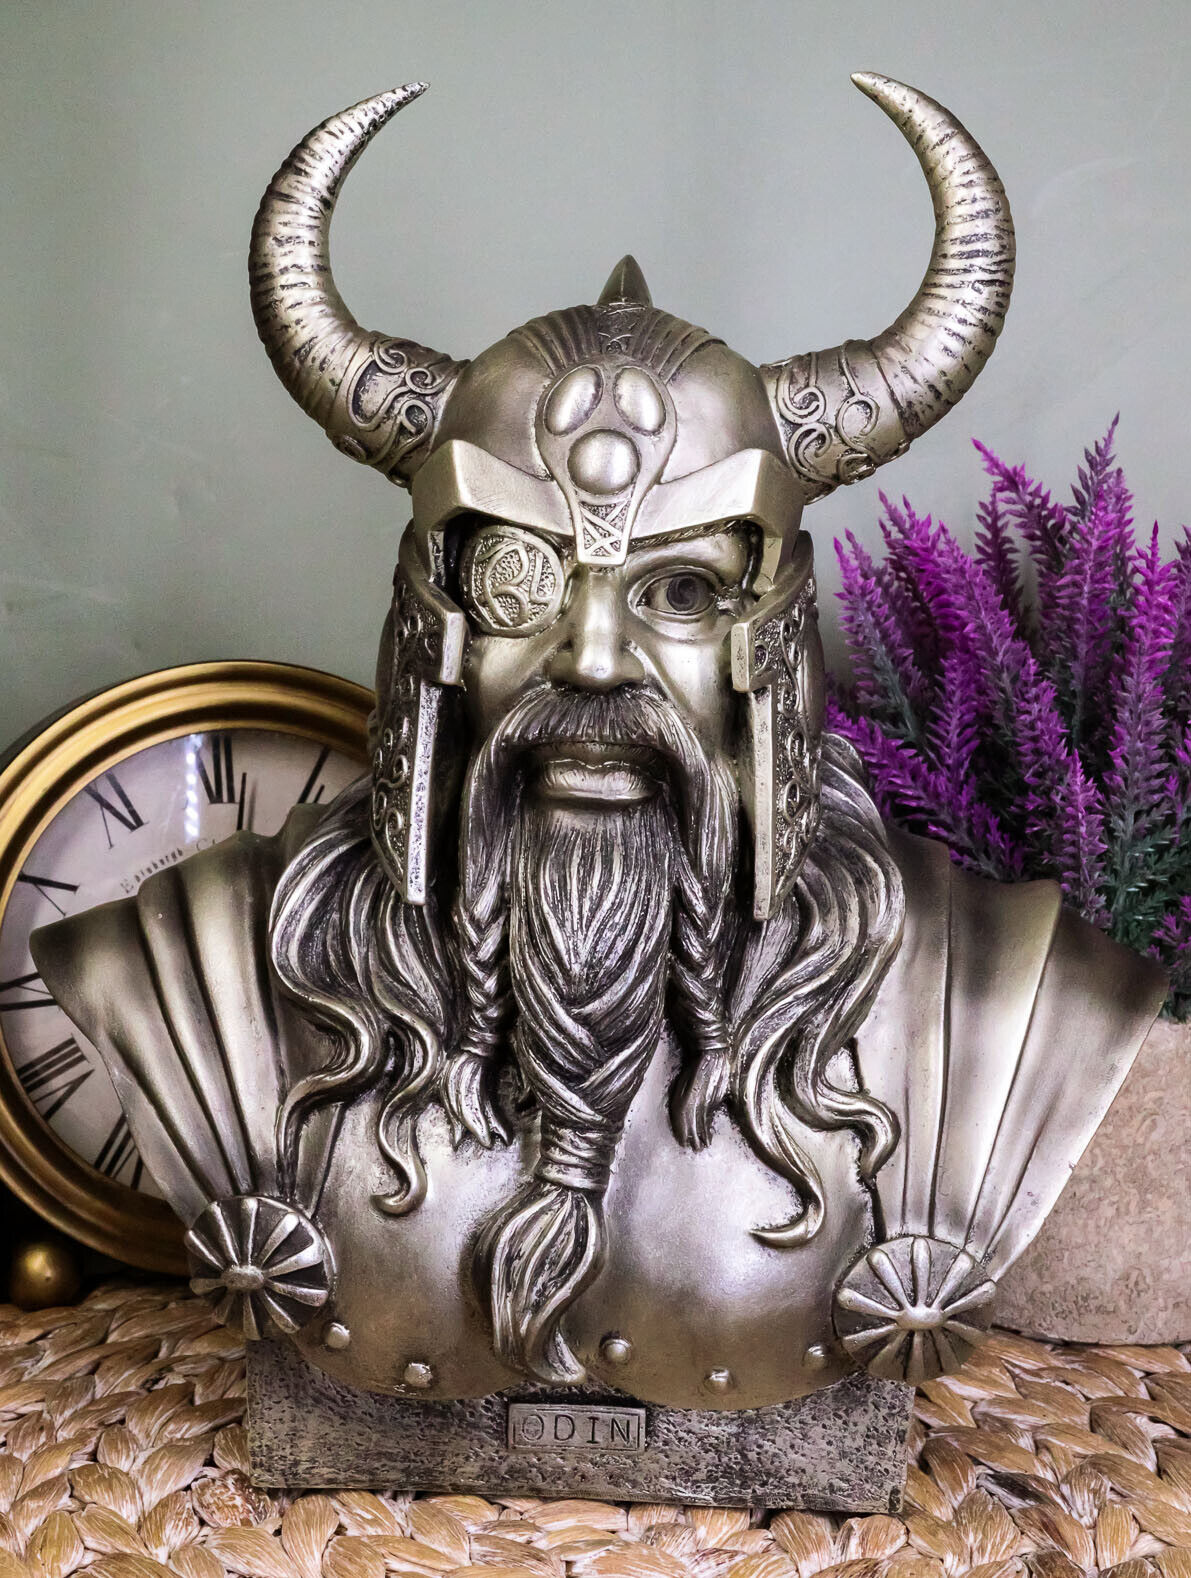 Norse Viking Warrior God Odin The Alfather Bust Statue Ruler Of Asgard Figurine